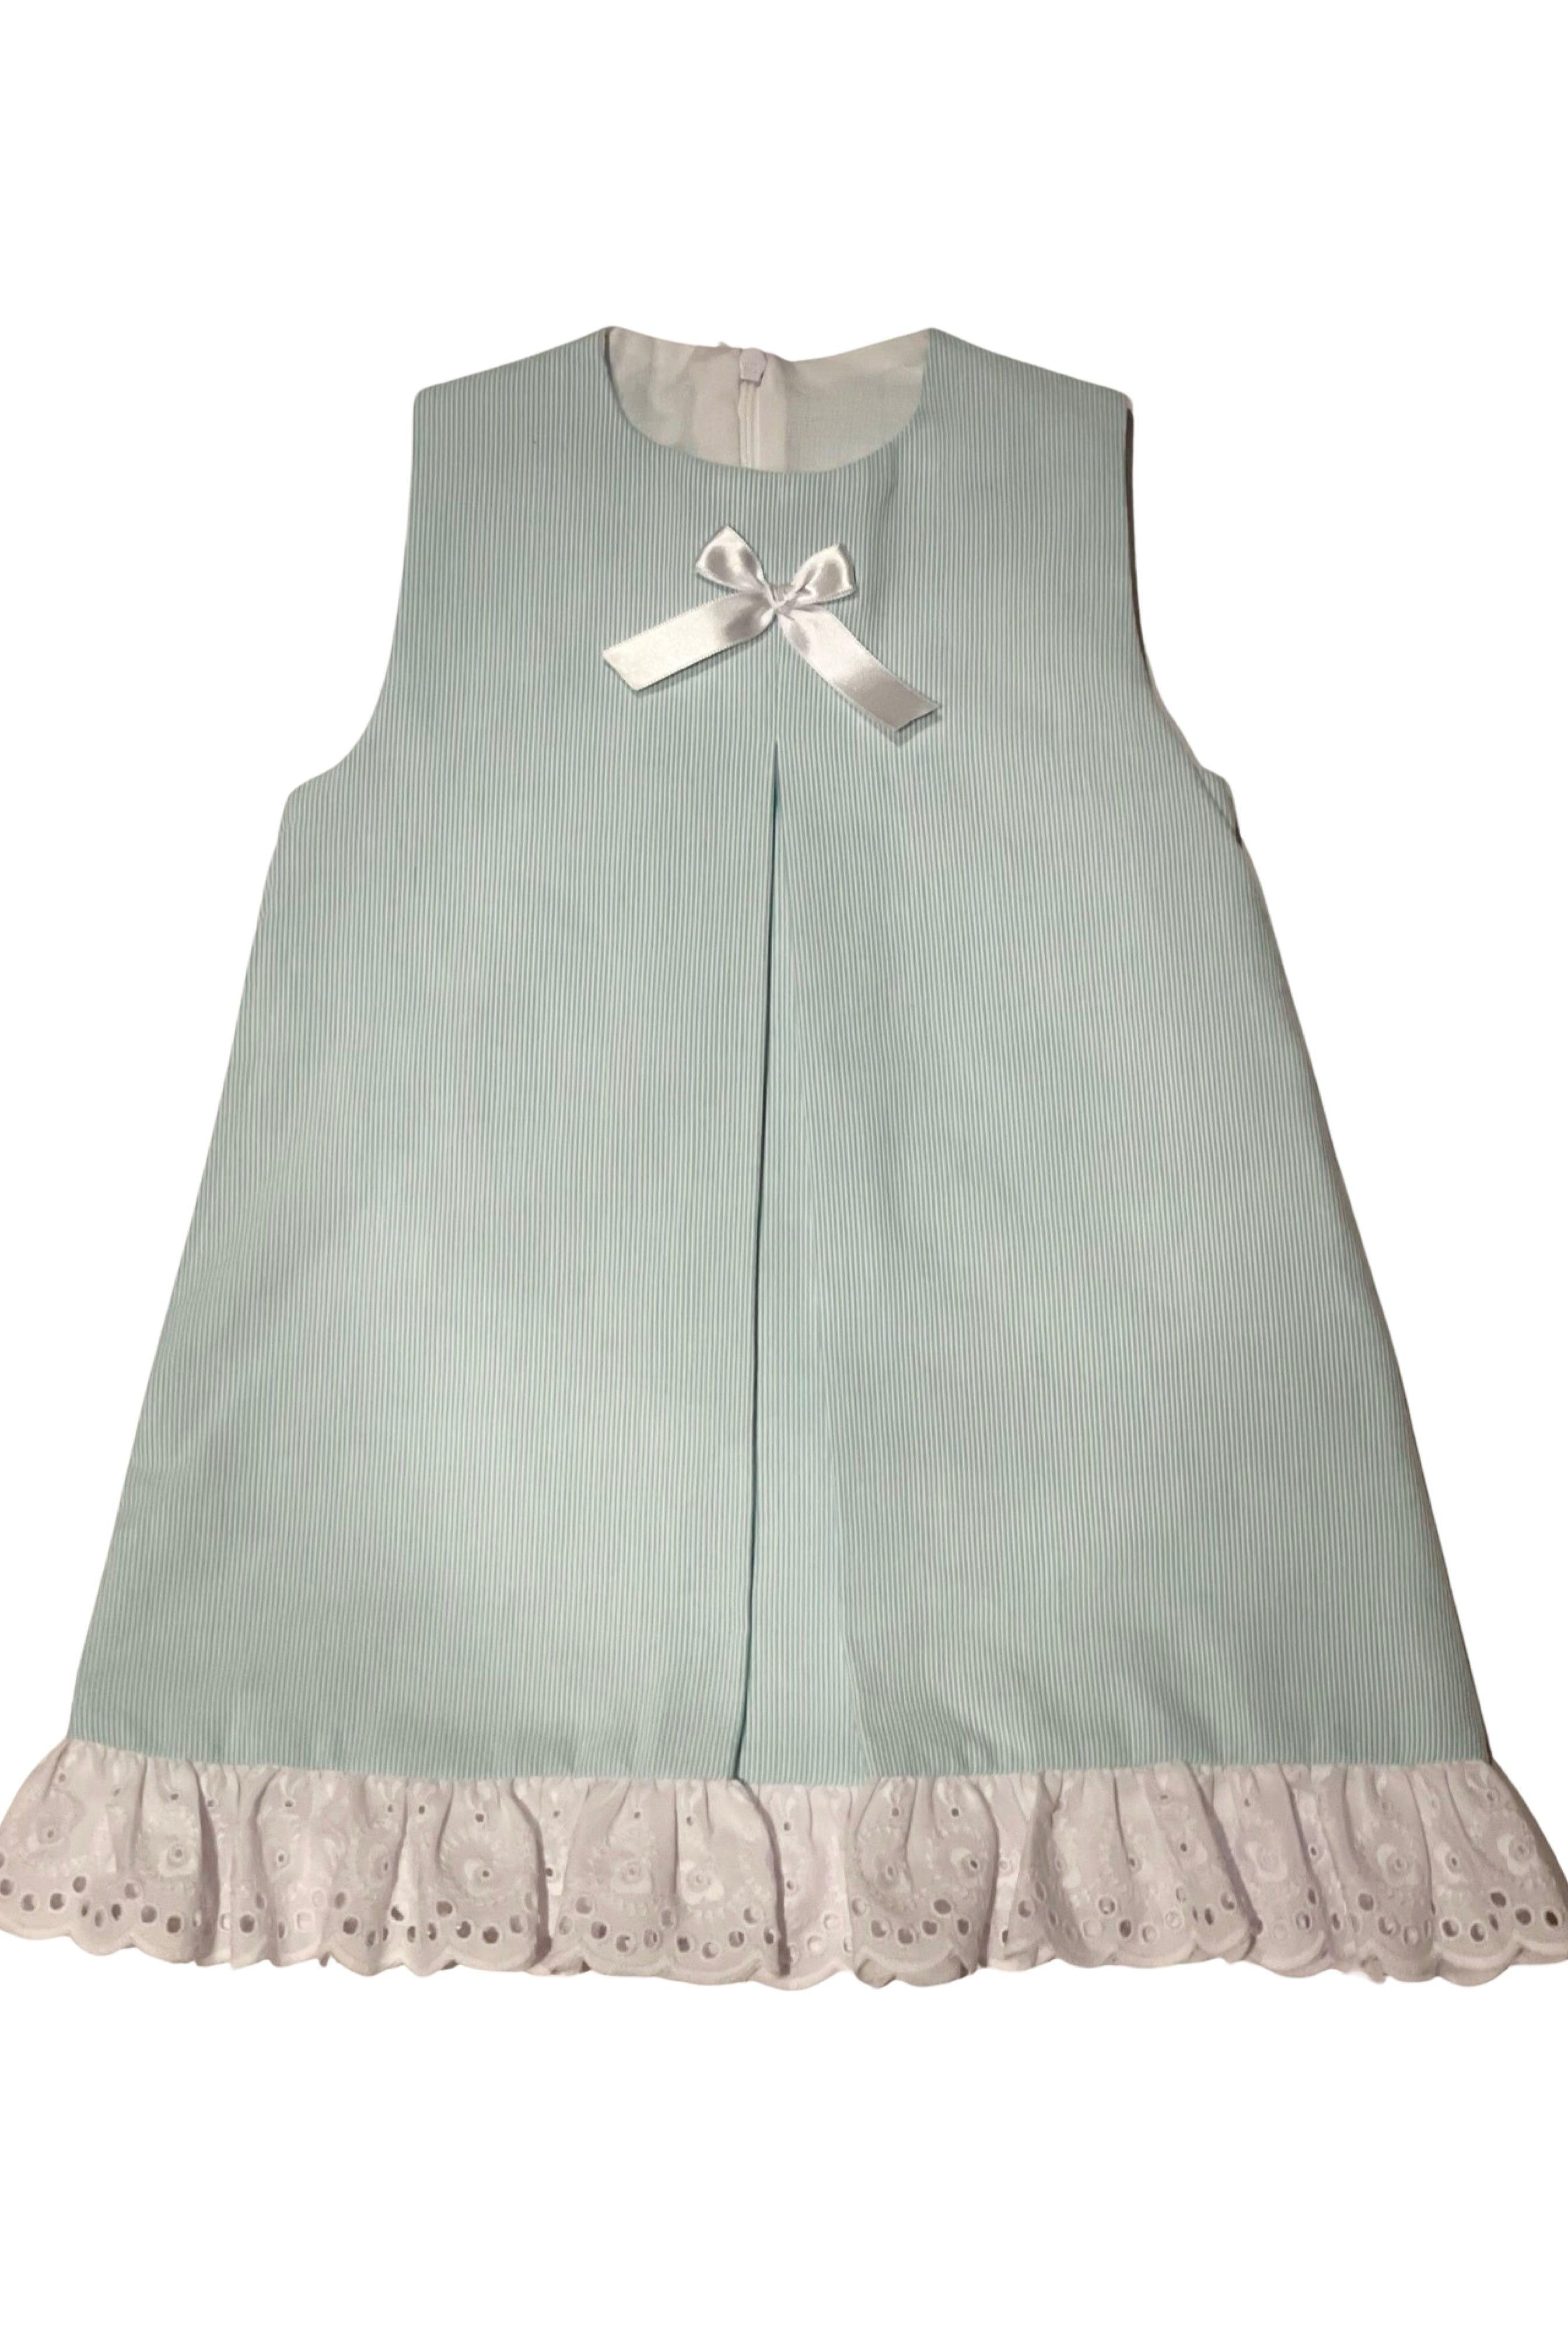 SS24 Lor Miral Girls Mint Bow A Line Dress Dainty Delilah